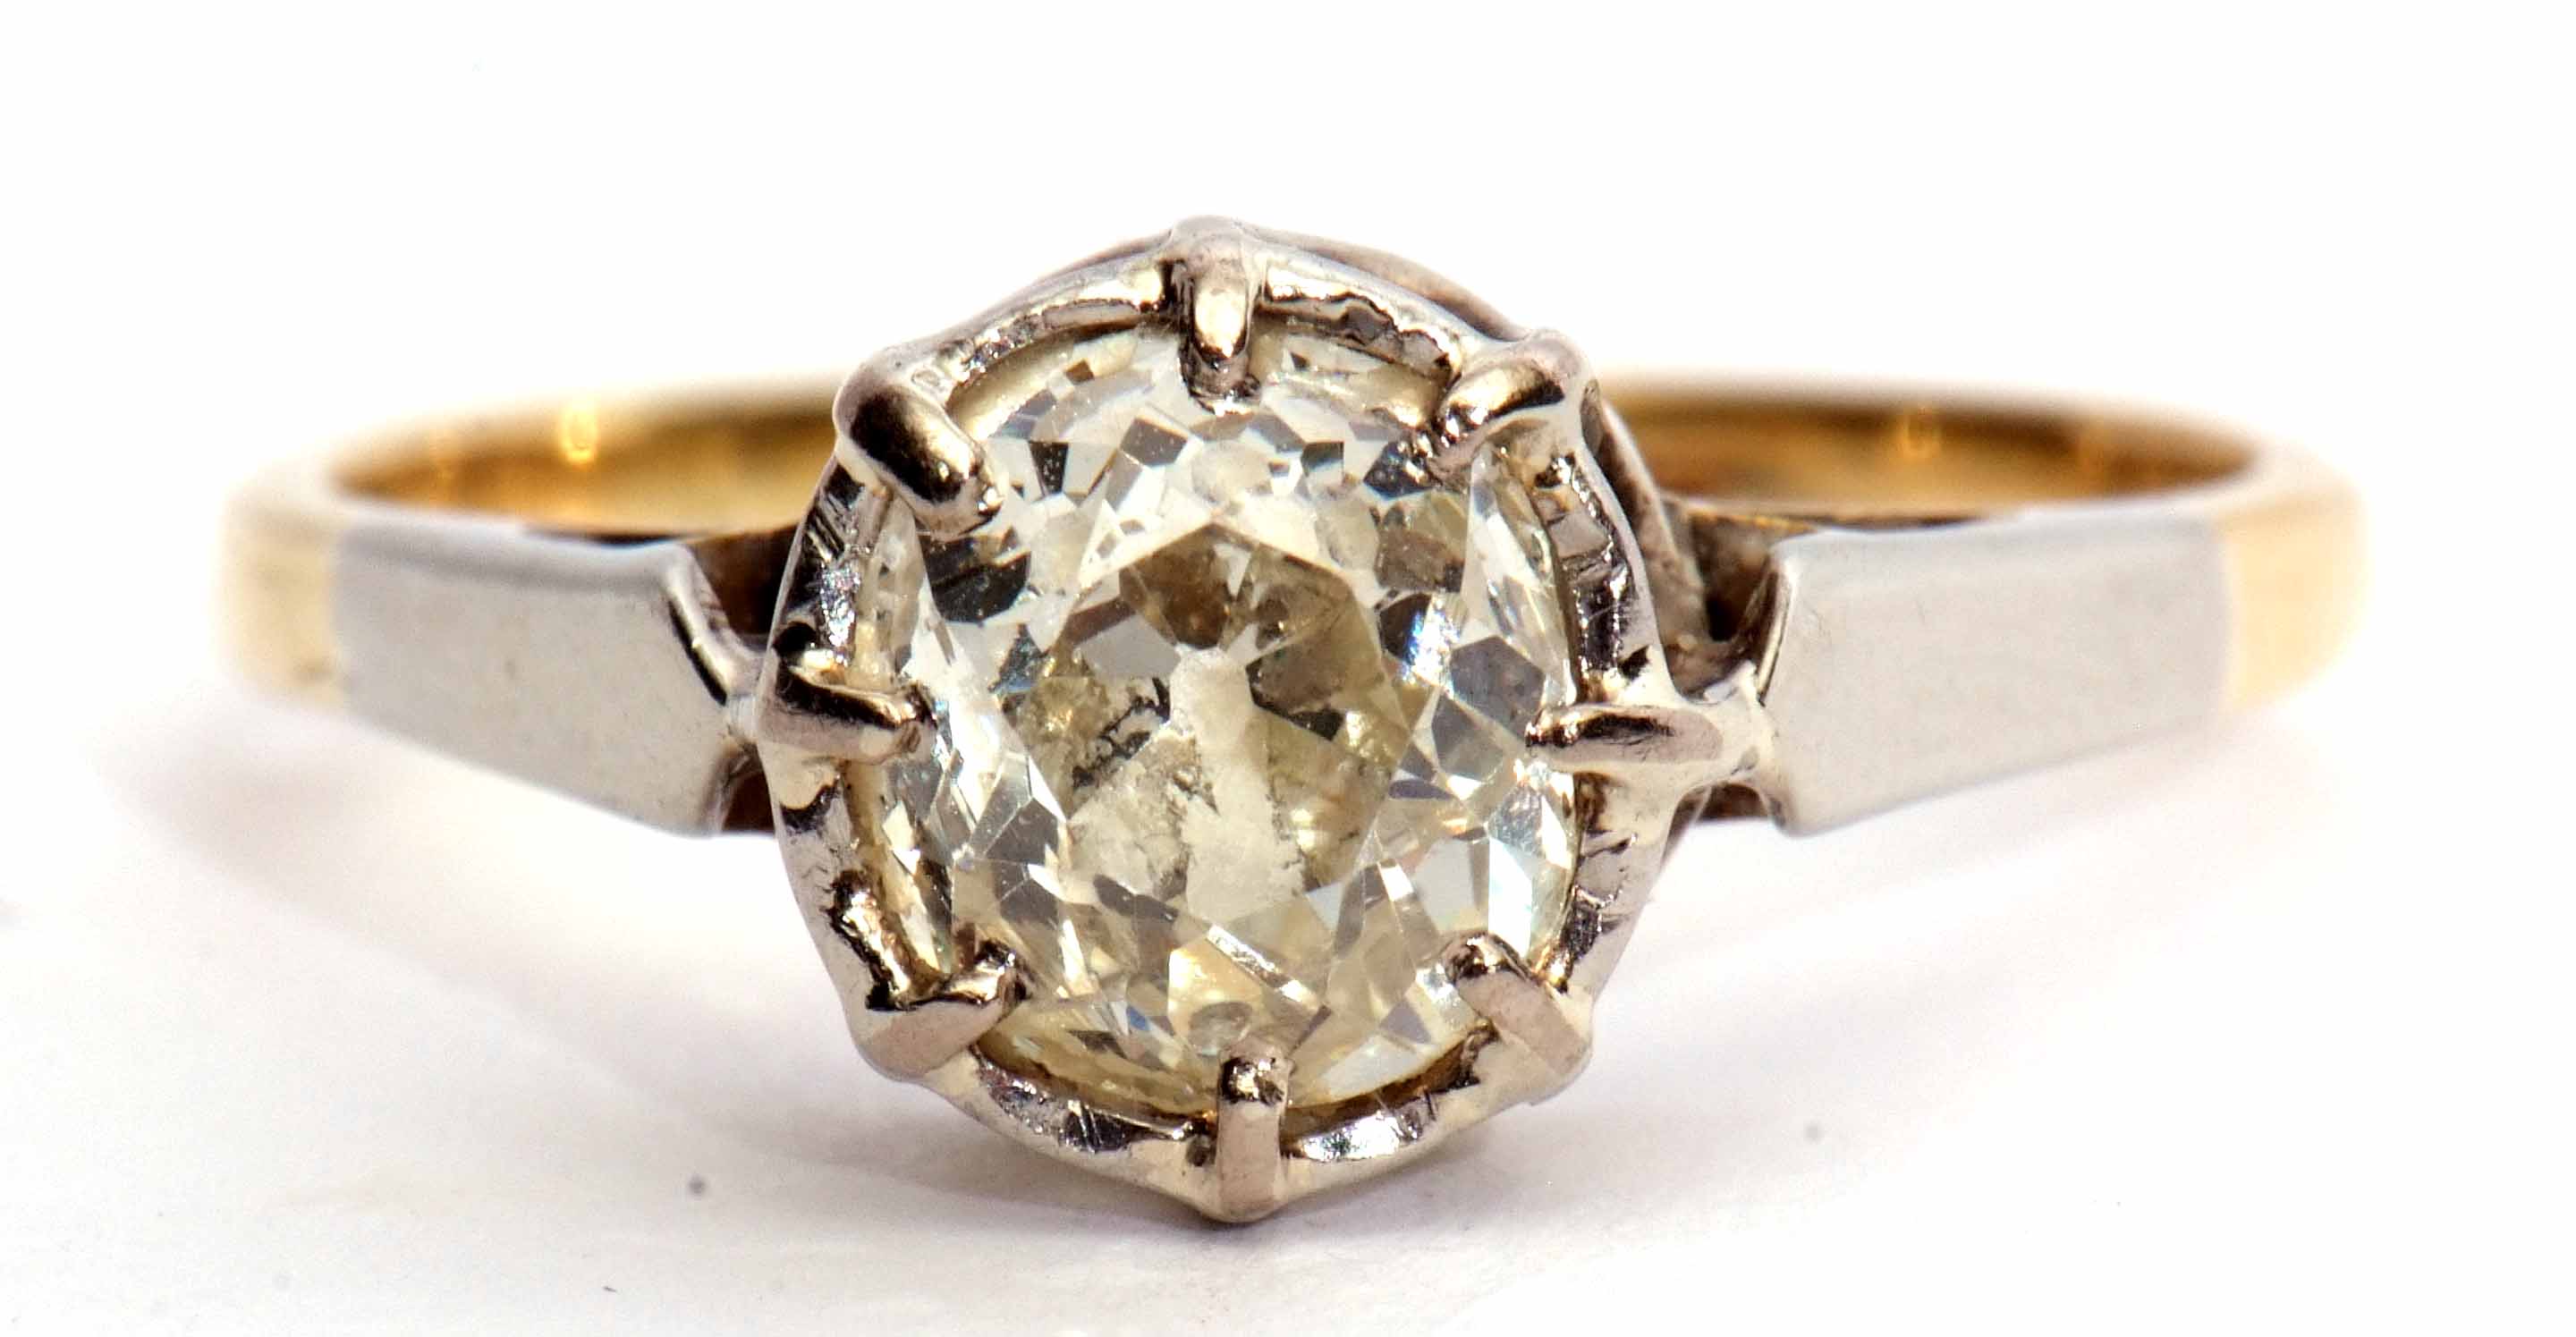 Precious metal single stone diamond ring, the old cut diamond 0.50ct approx, claw set and raised - Image 2 of 4